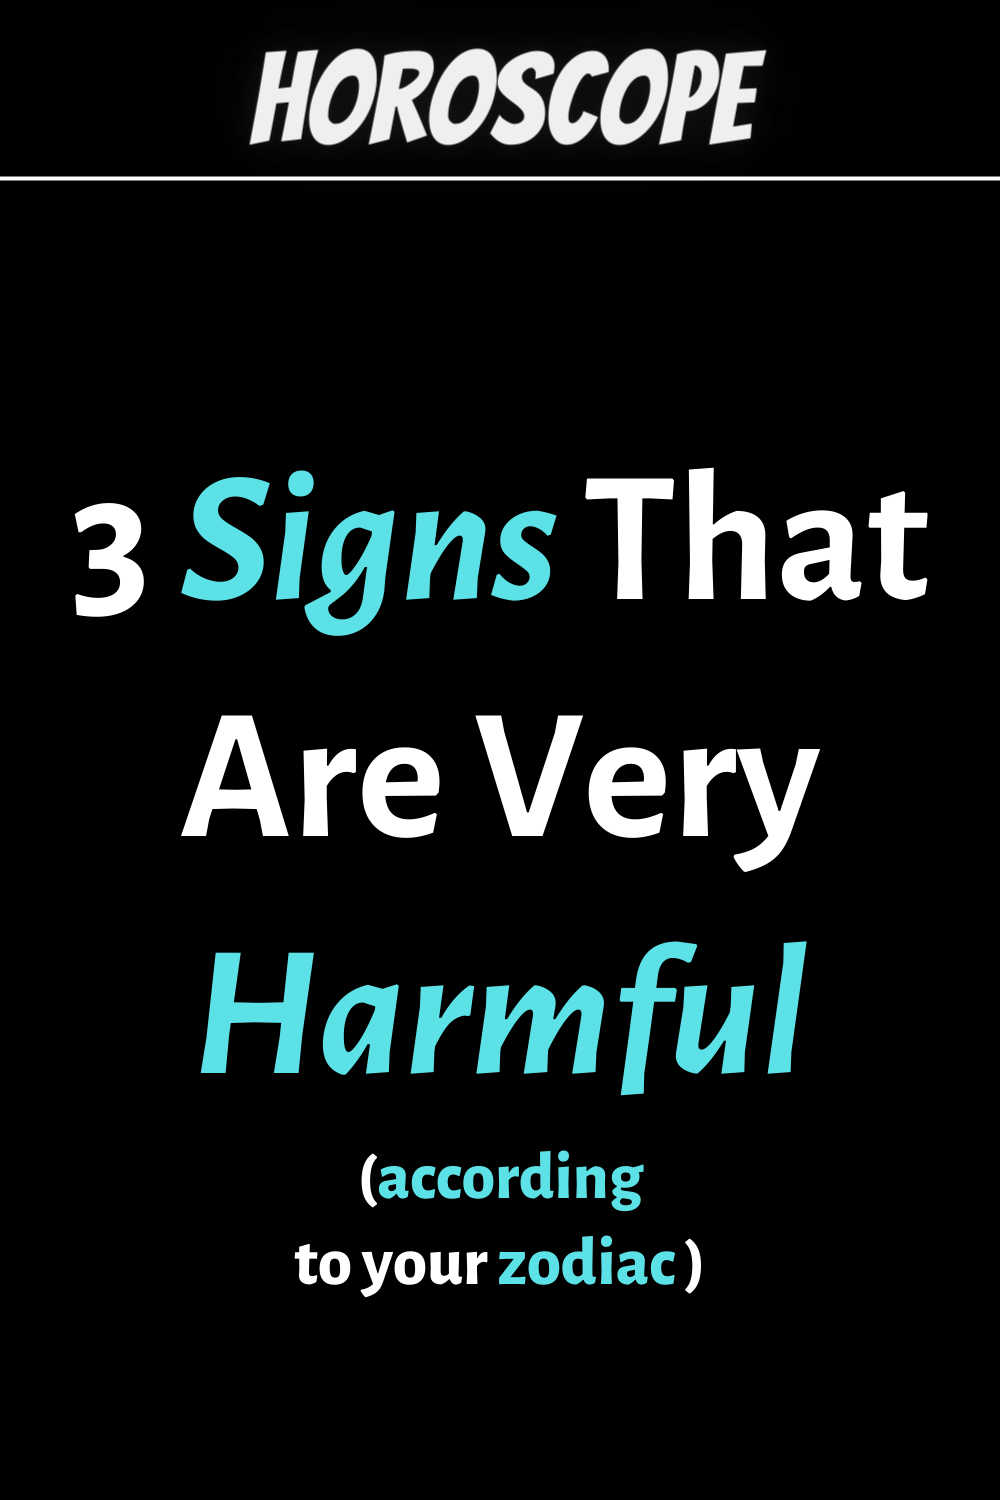 3 Signs That Are Very Harmful